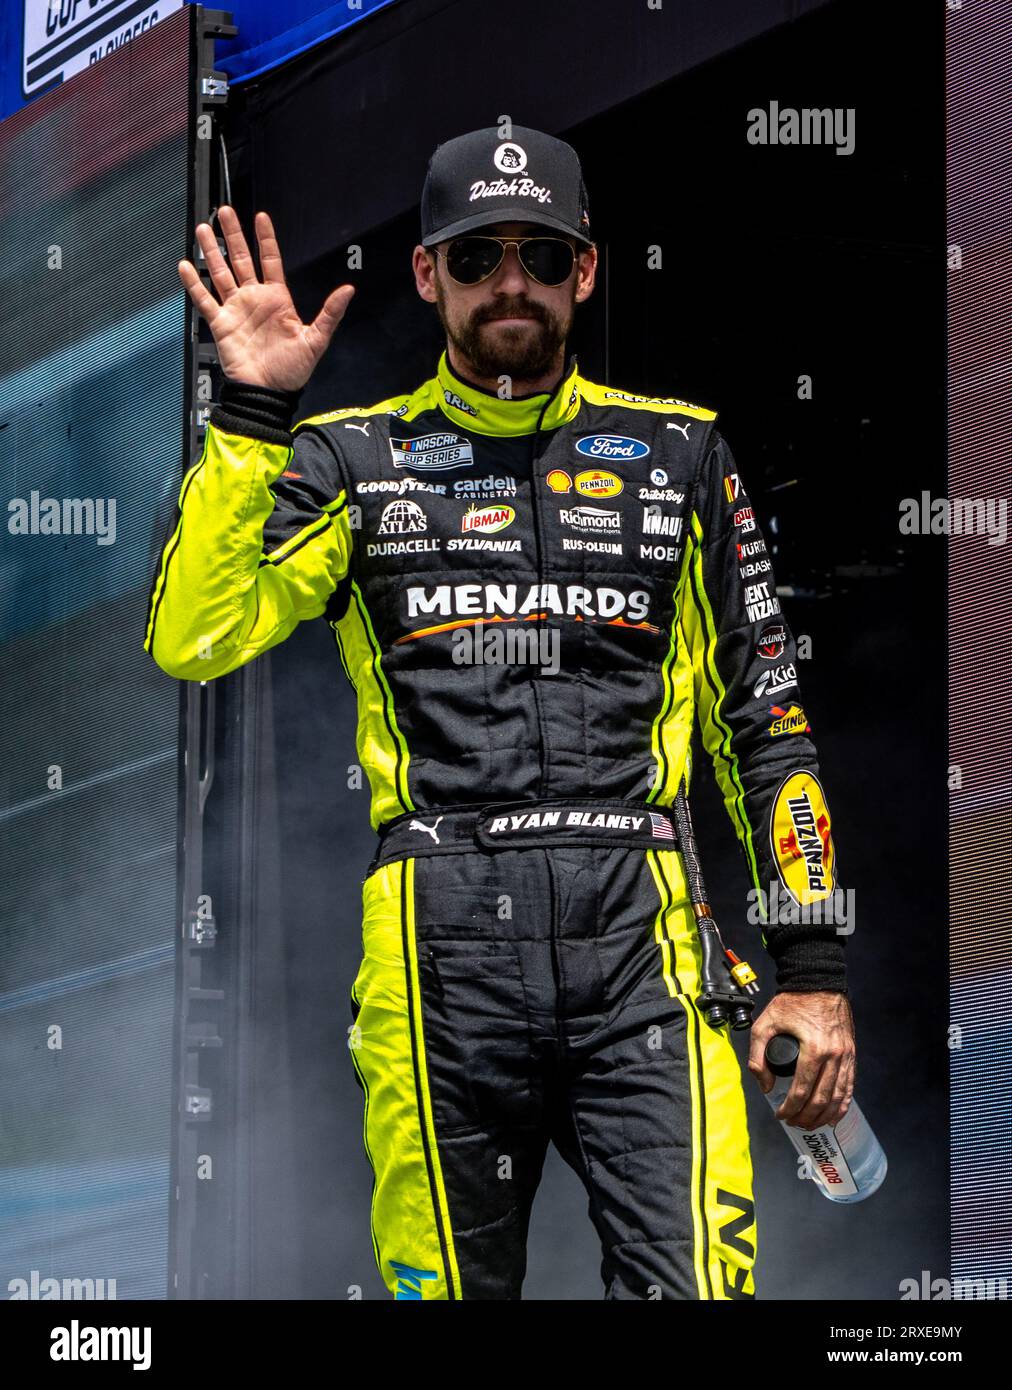 Fort Worth, Texas - September 24rd, 2023: Ryan Blaney, driver of the #12 Menards Ford, competing in the NASCAR Autotrader EchoPark Automotive 400 at Texas Motor Speedway. Credit: Nick Paruch/Alamy Live News Stock Photo